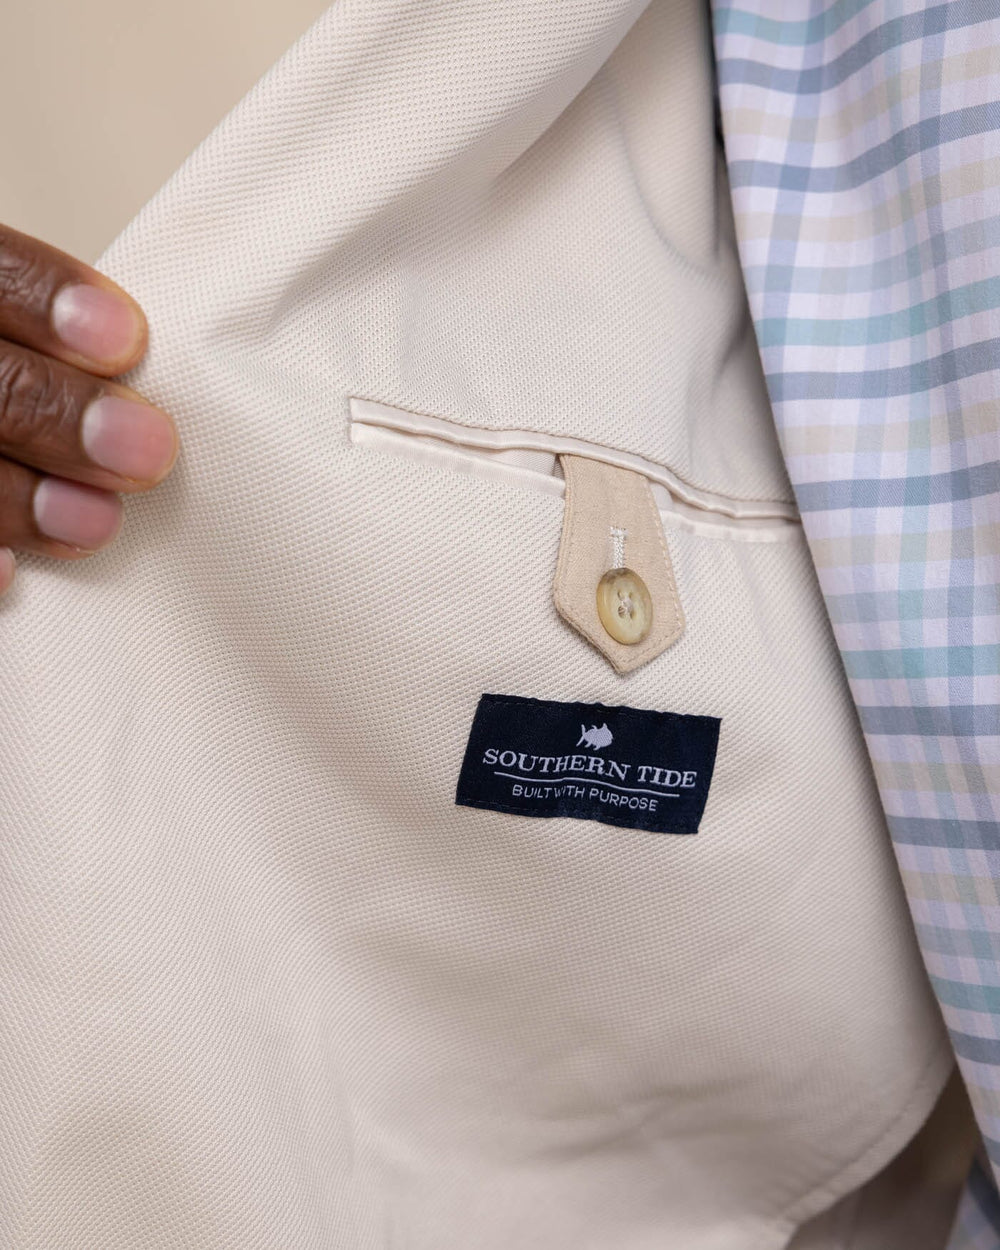 The detail view of the Southern Tide charleston-navy-blazer by Southern Tide - Perfectly Pale Khaki